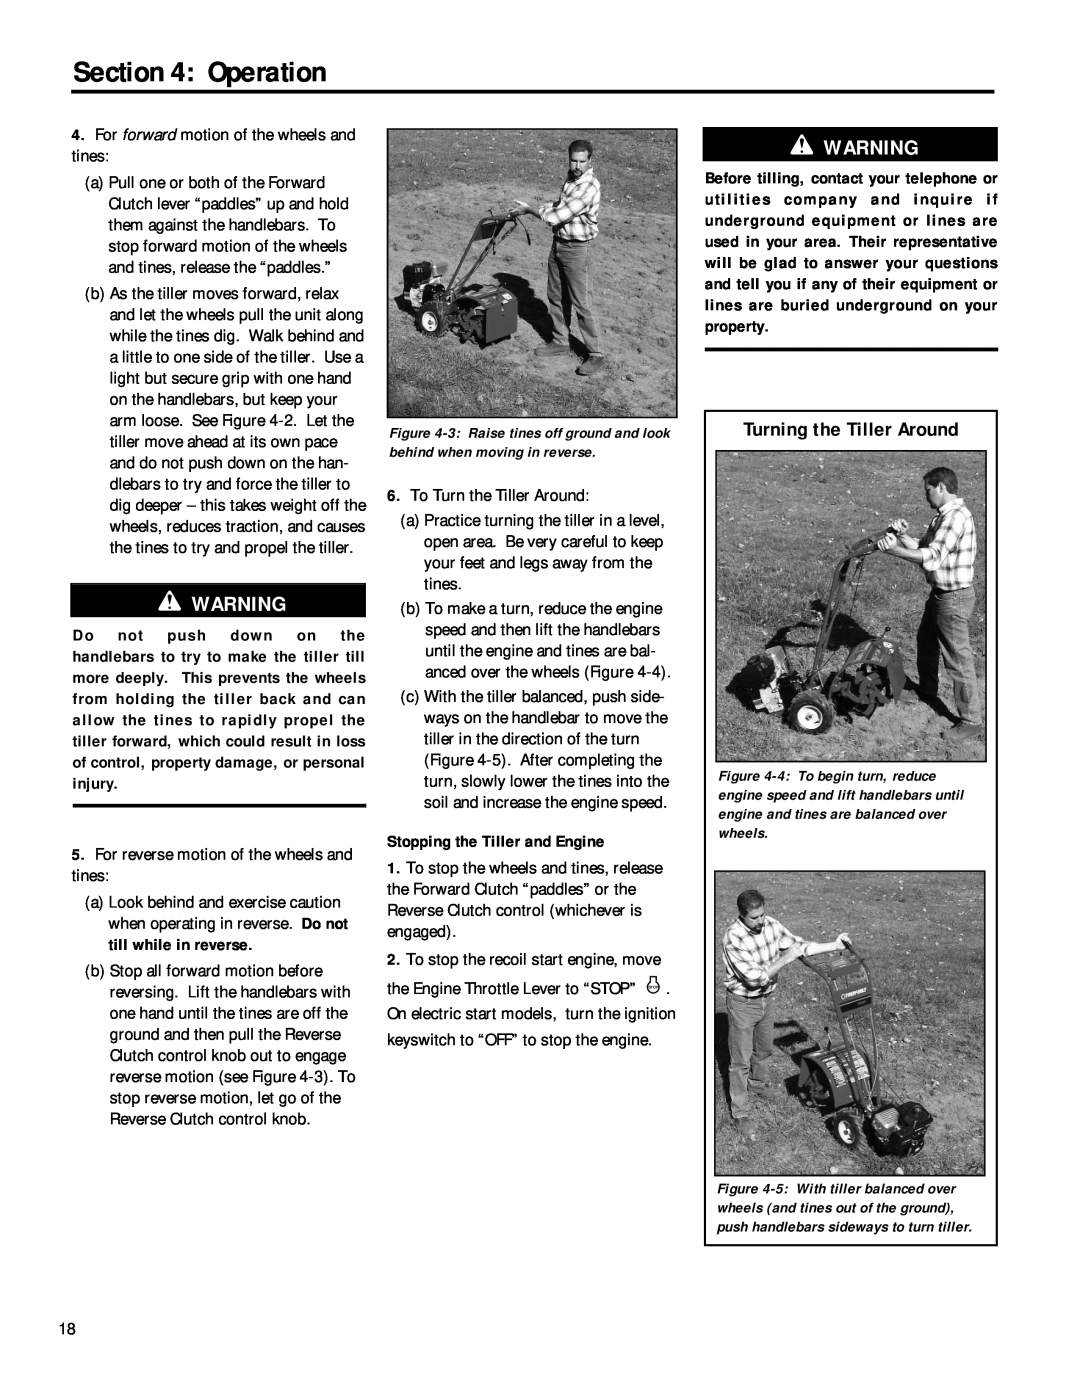 Troy-Bilt 12212, 12211 owner manual Turning the Tiller Around, Stopping the Tiller and Engine, Operation 